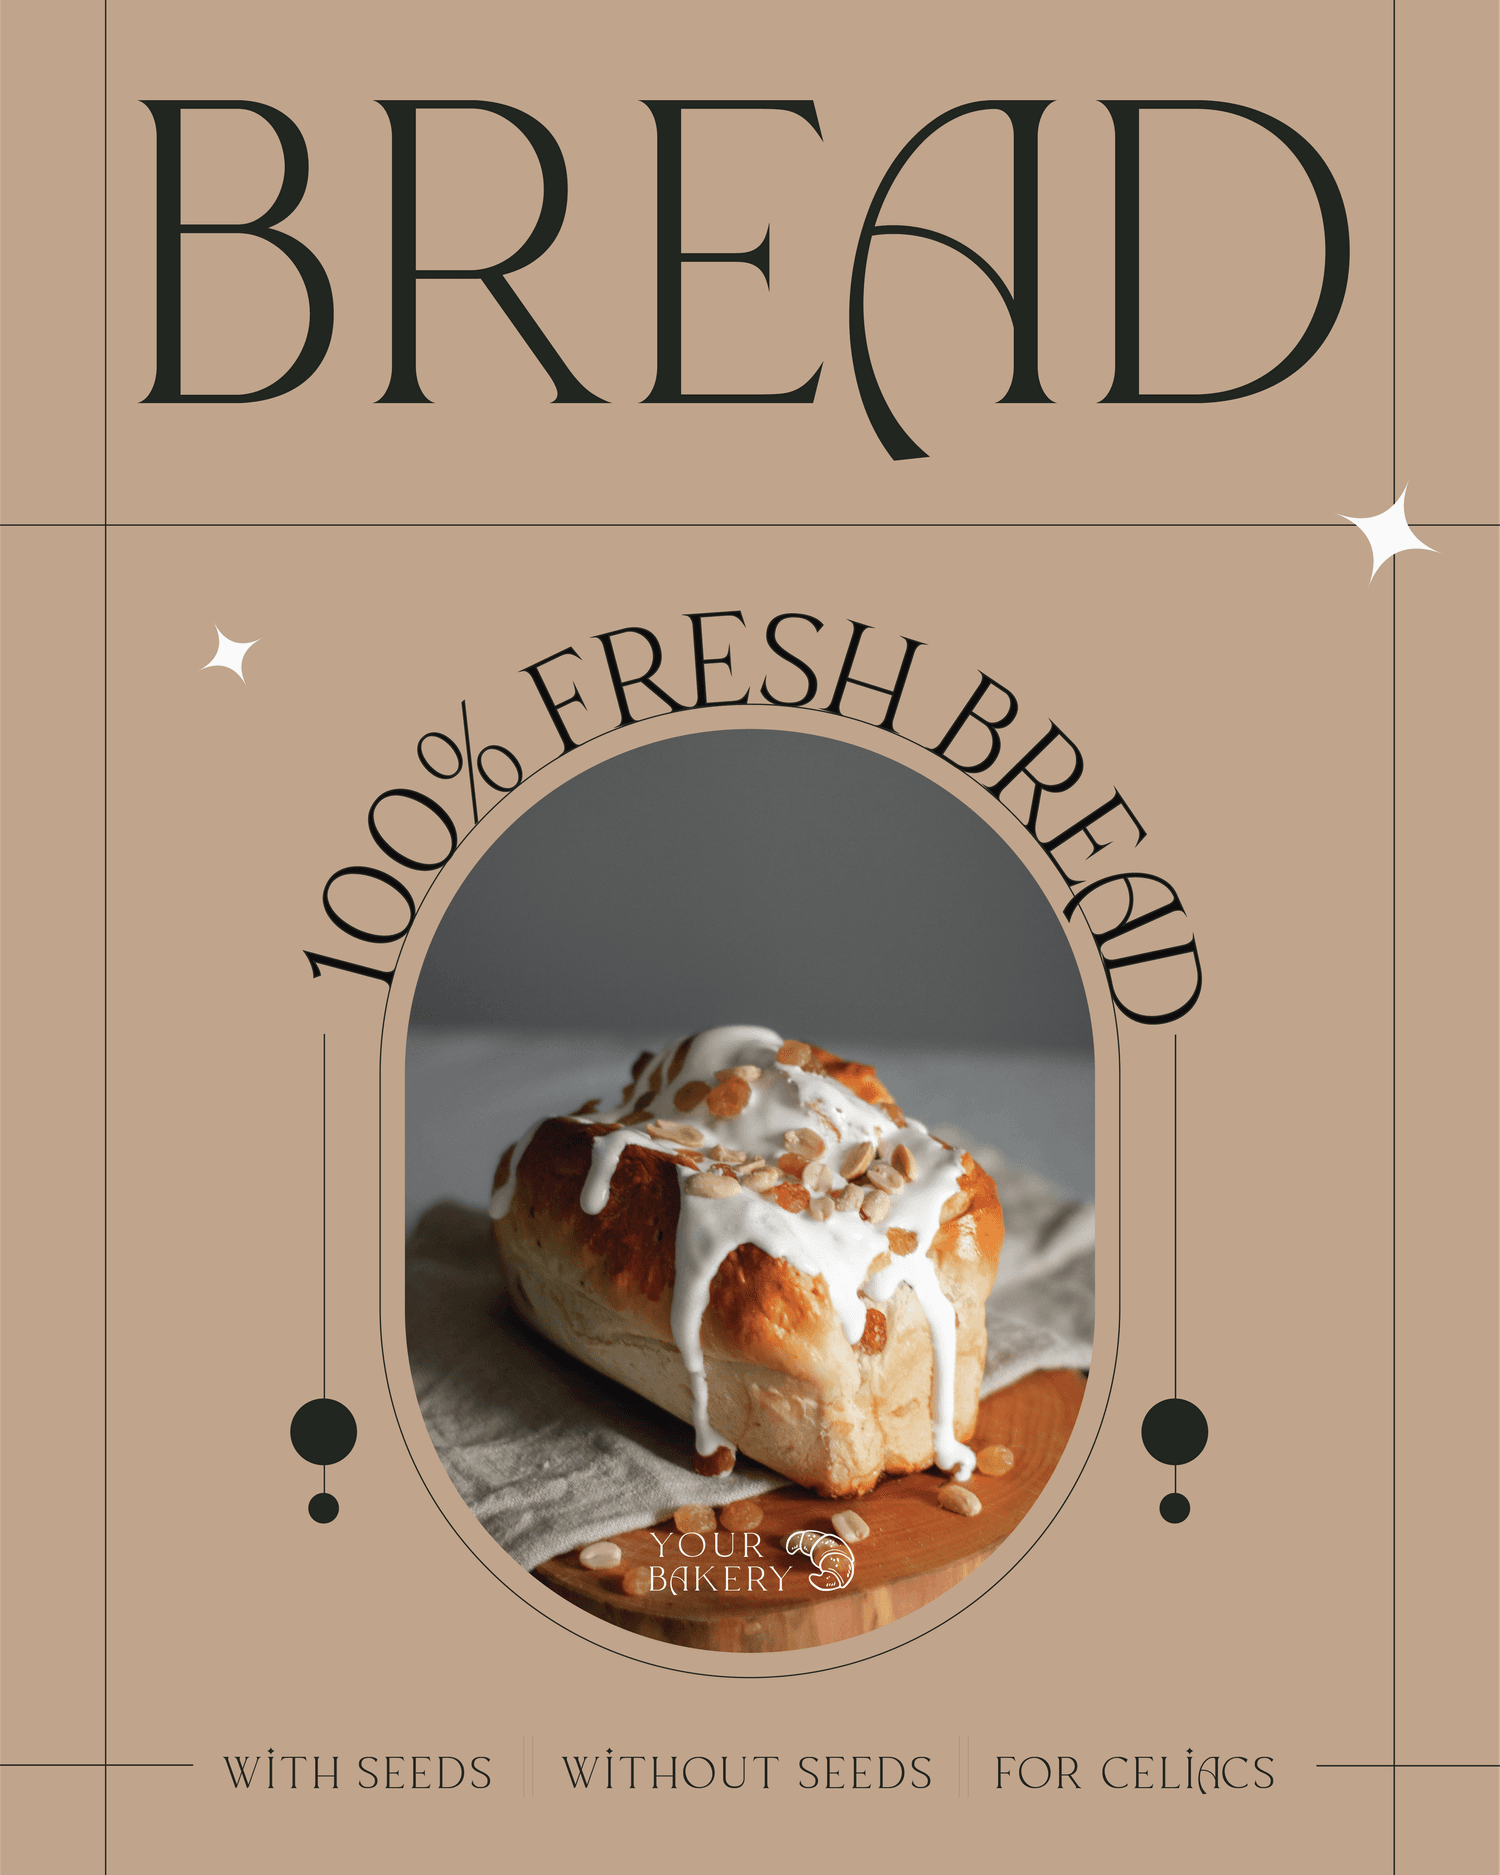 bread bakery advertising poster template with minimalist style